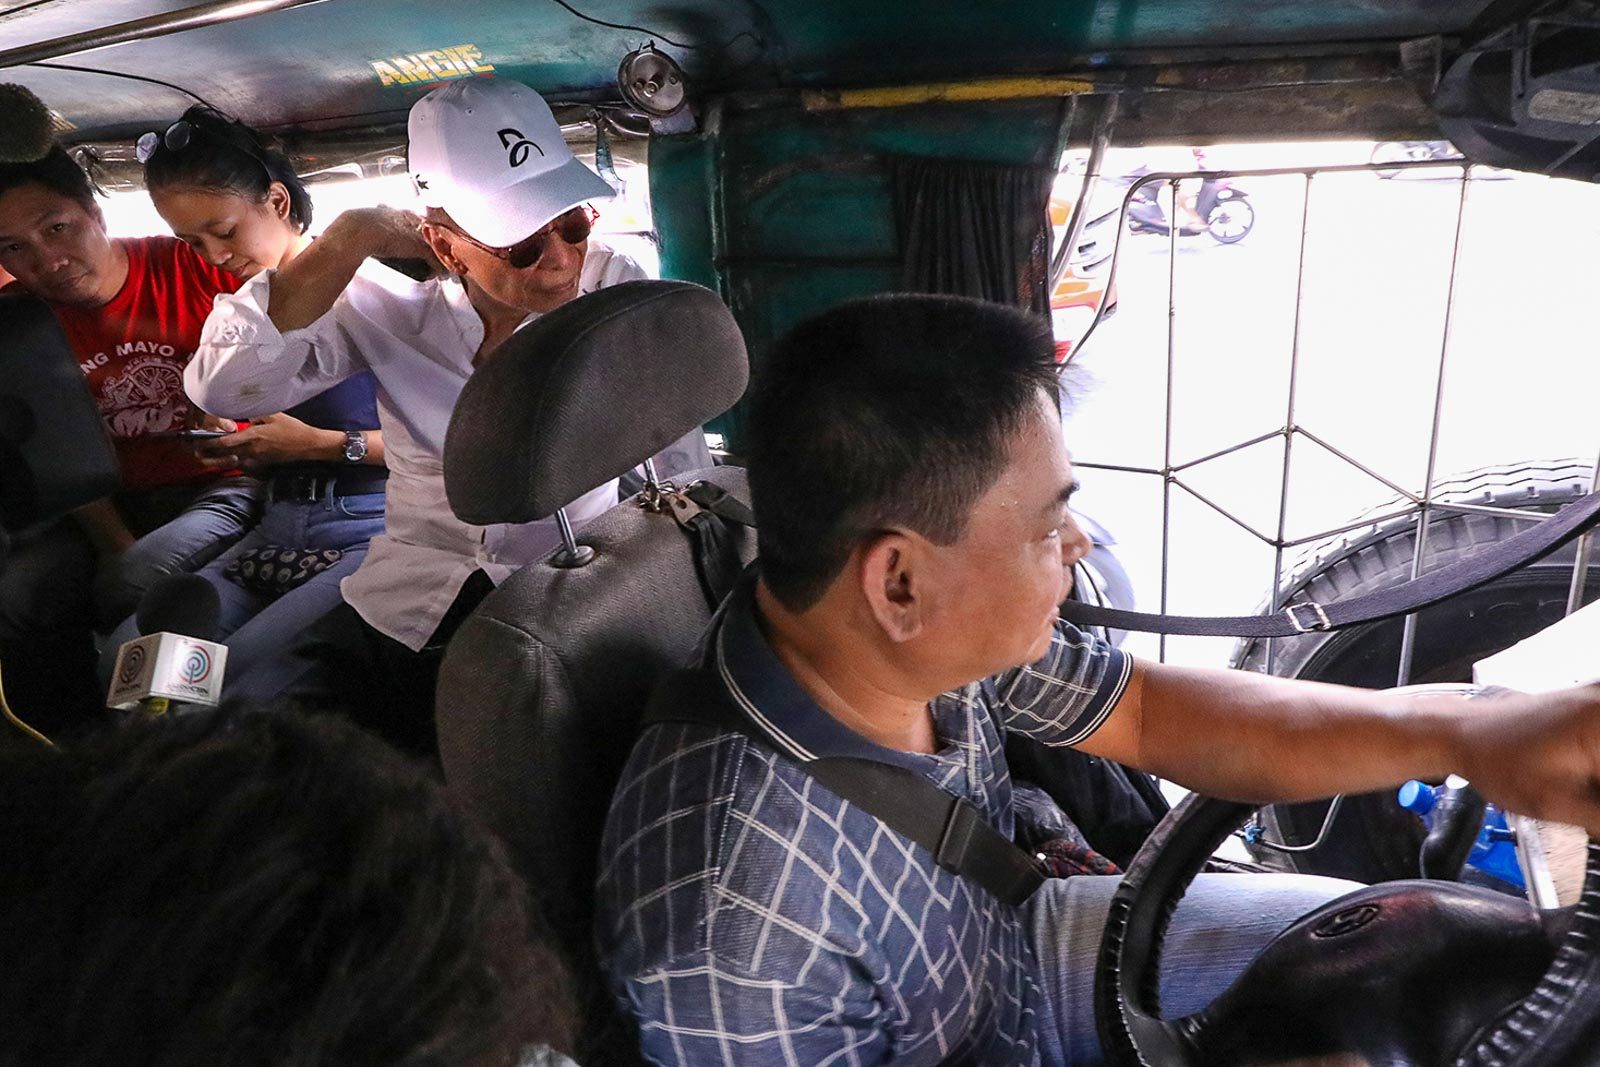 Panelo ‘sorely missed the point’ of commute challenge, say militant groups